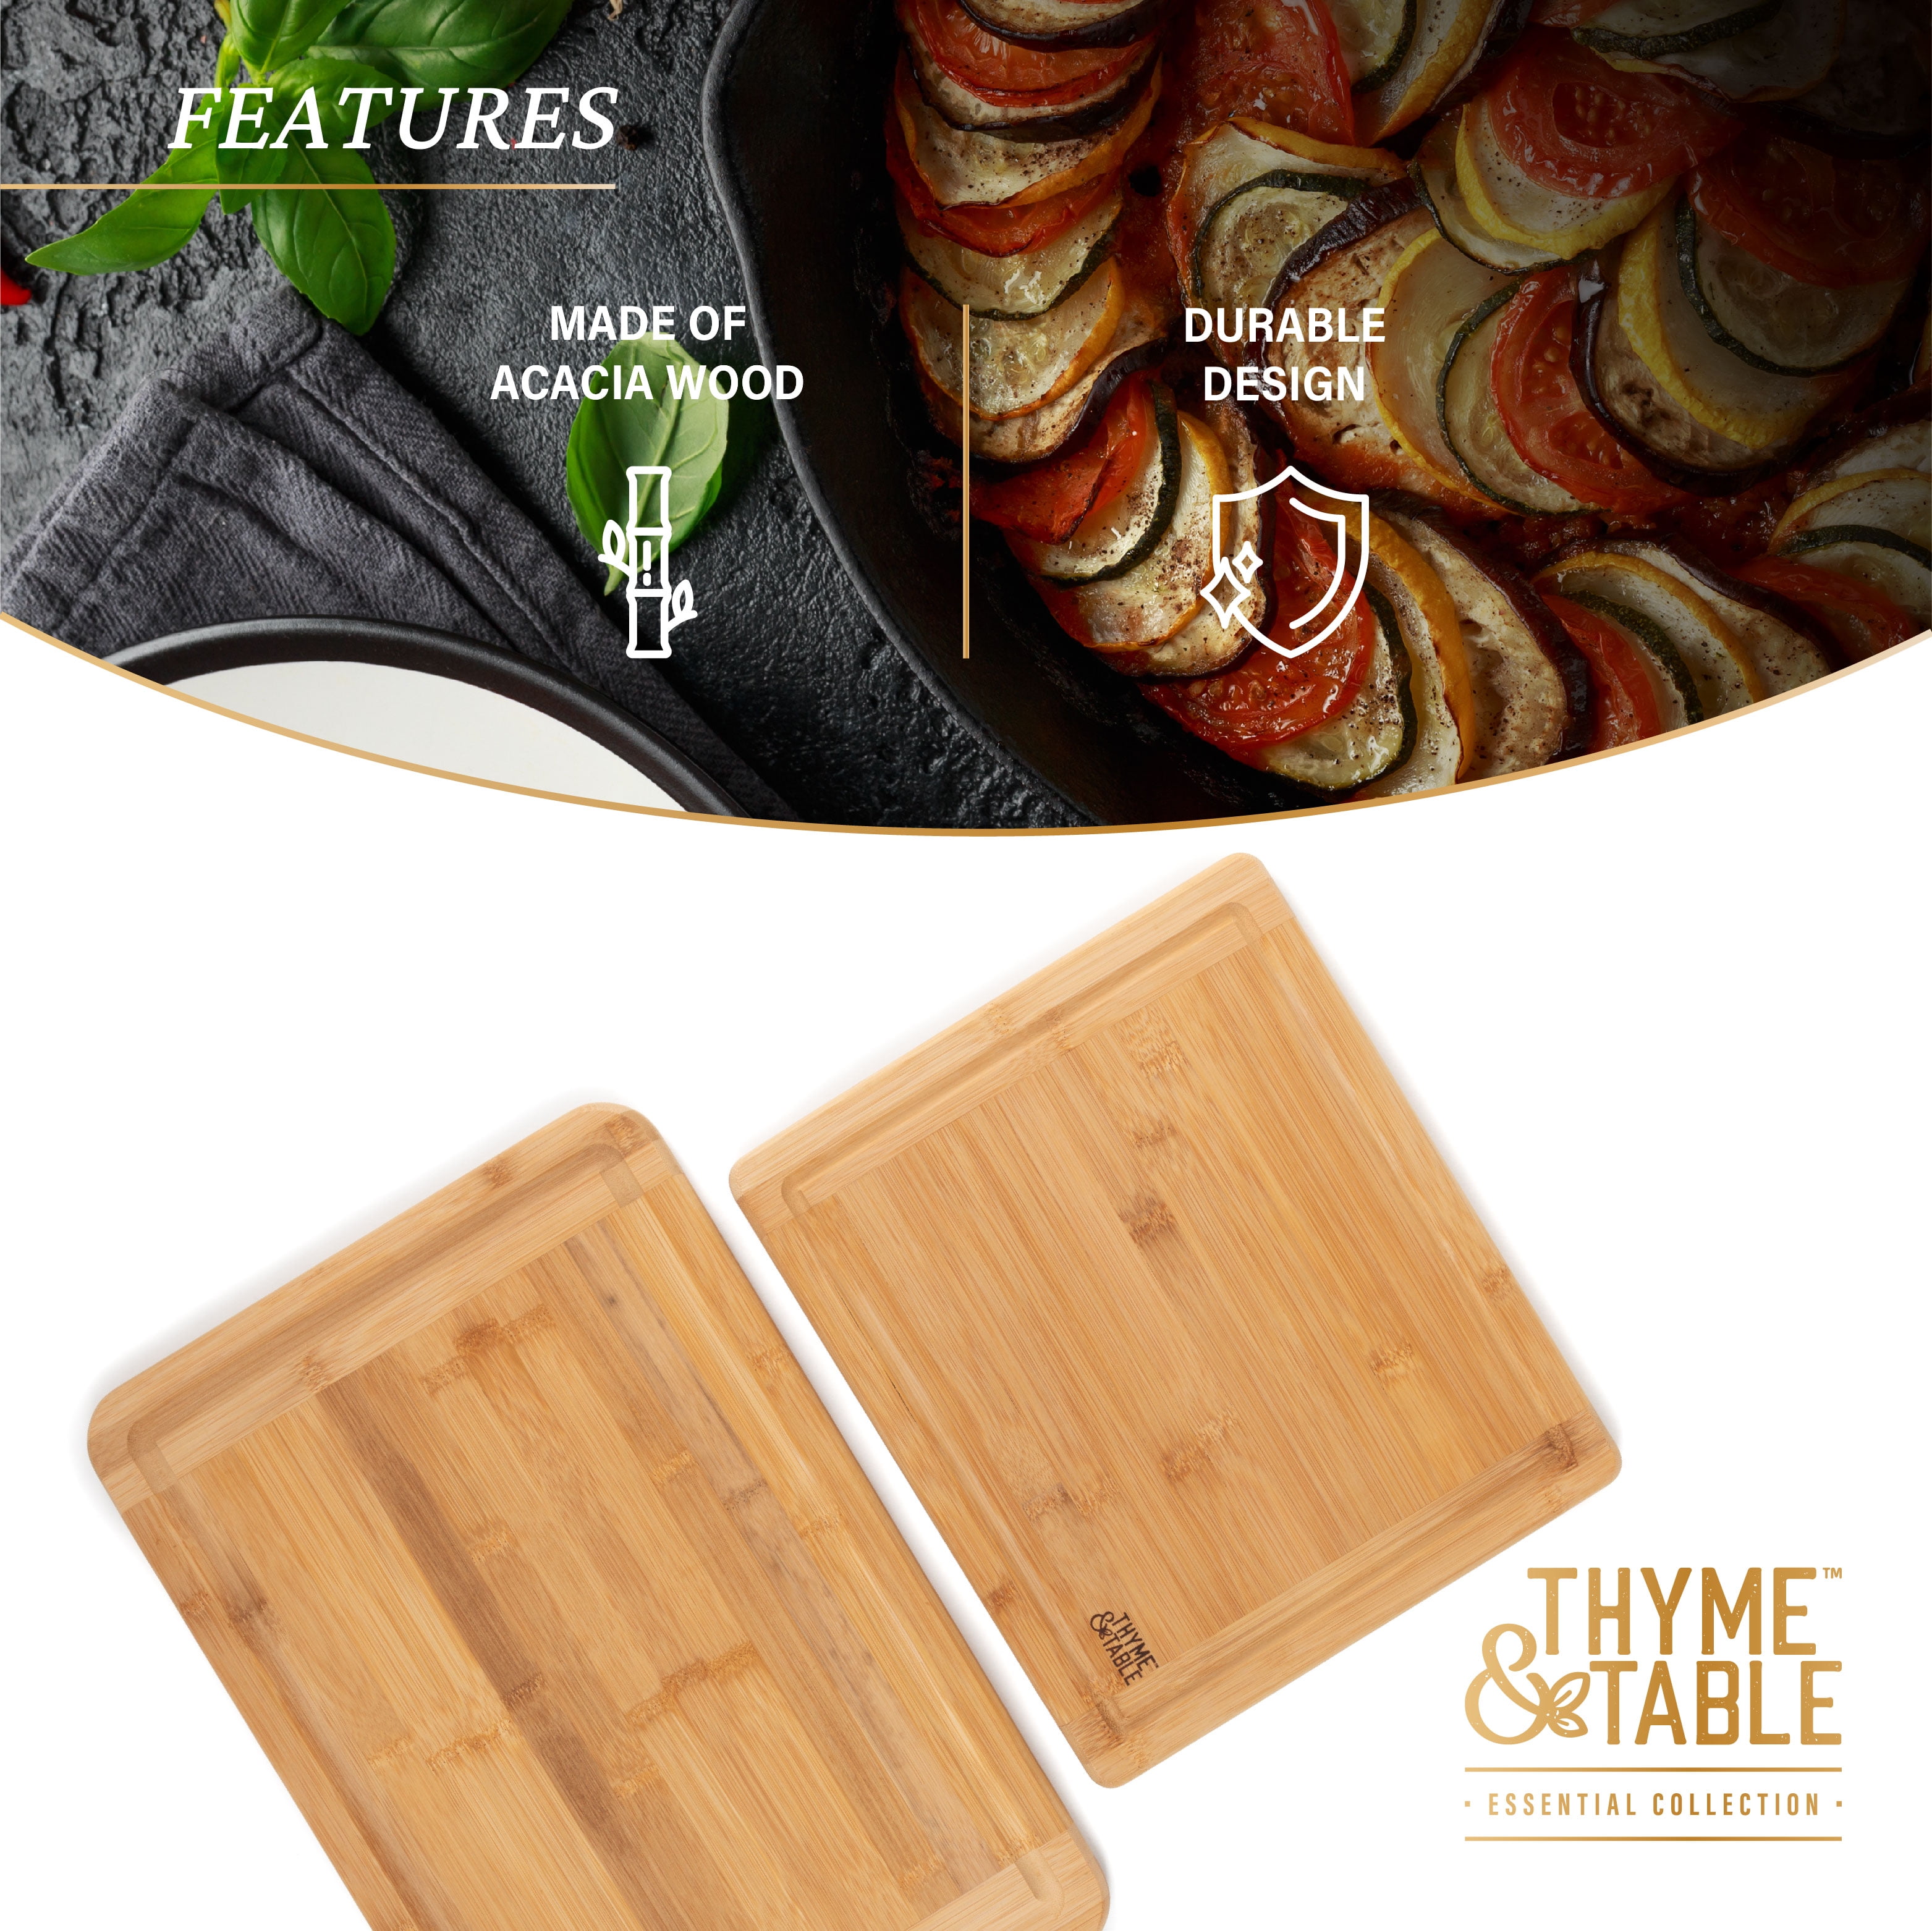 Tramontina Cutting Board 2-Piece Set, Brown 81000/000DS